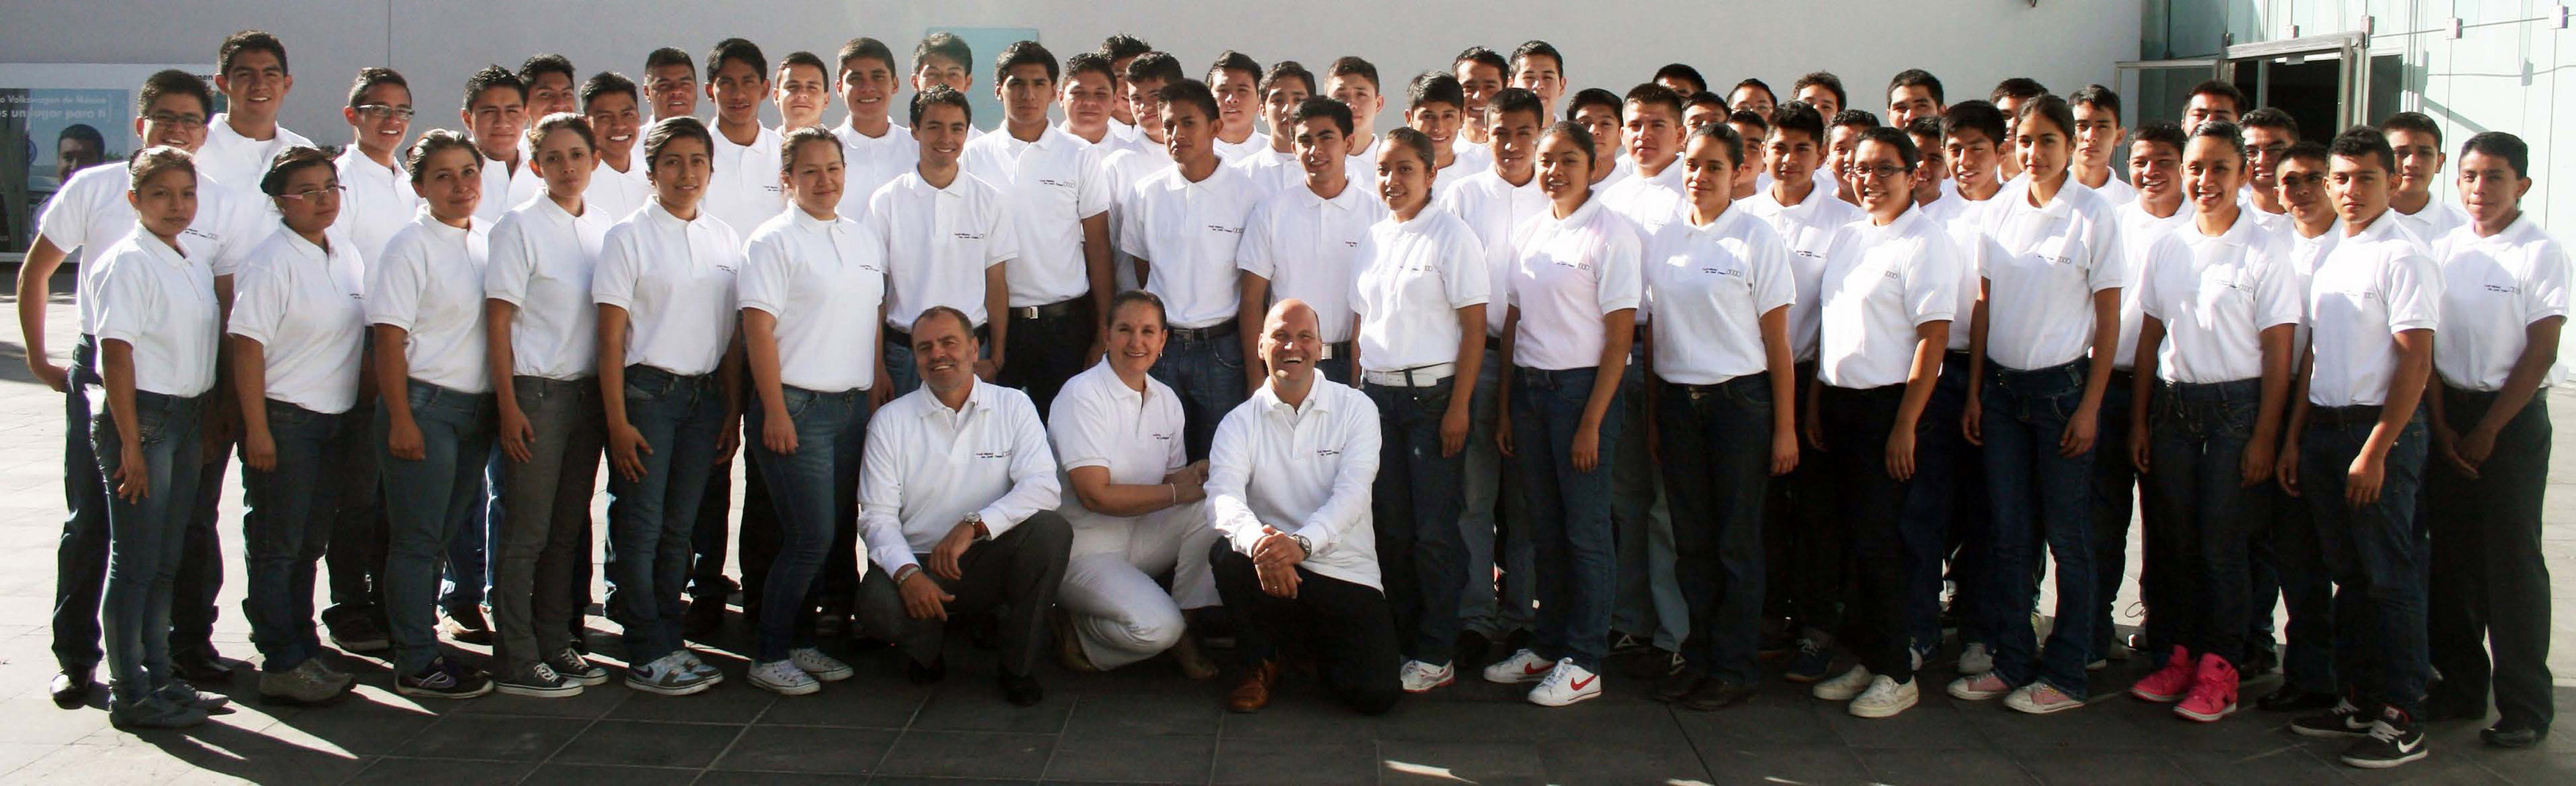 Starting signal for first year of apprentices  at Audi in Mexico